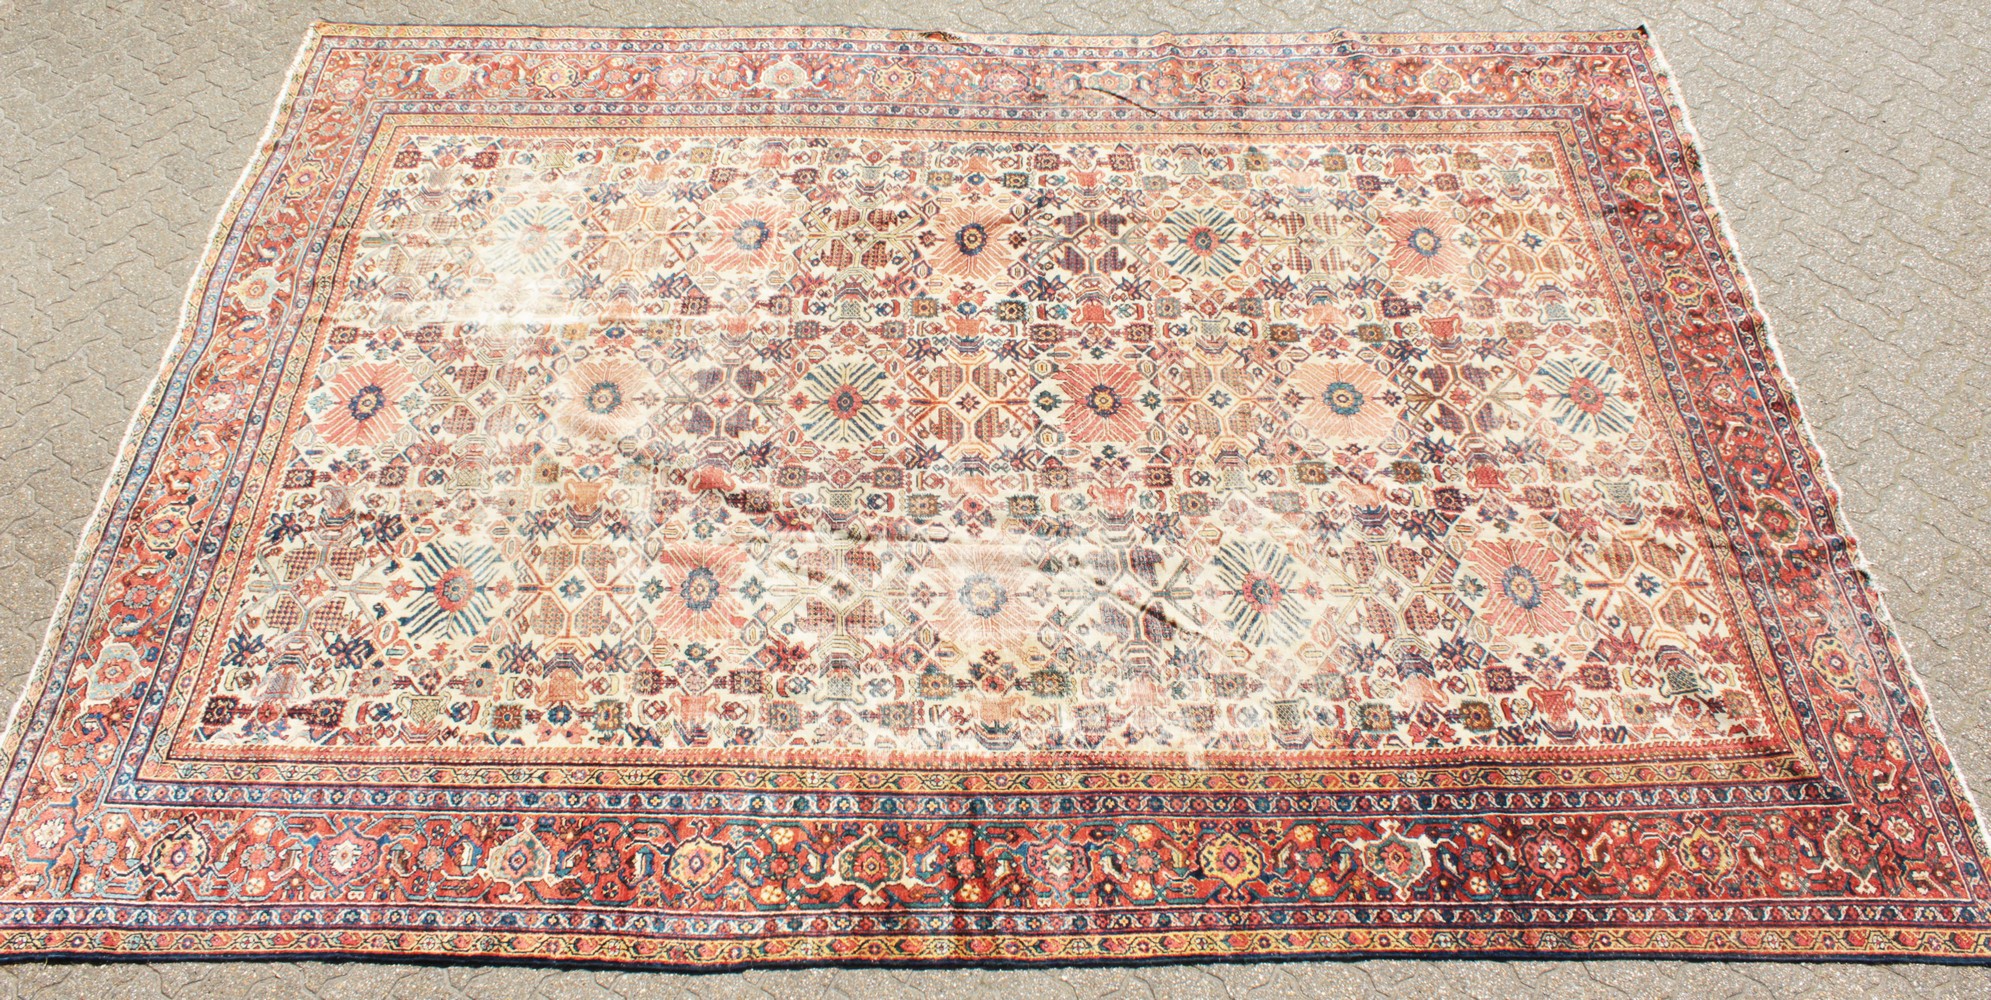 A VERY LARGE PERSIAN MAHAL CARPET. 15ft x 10ft 6ins.